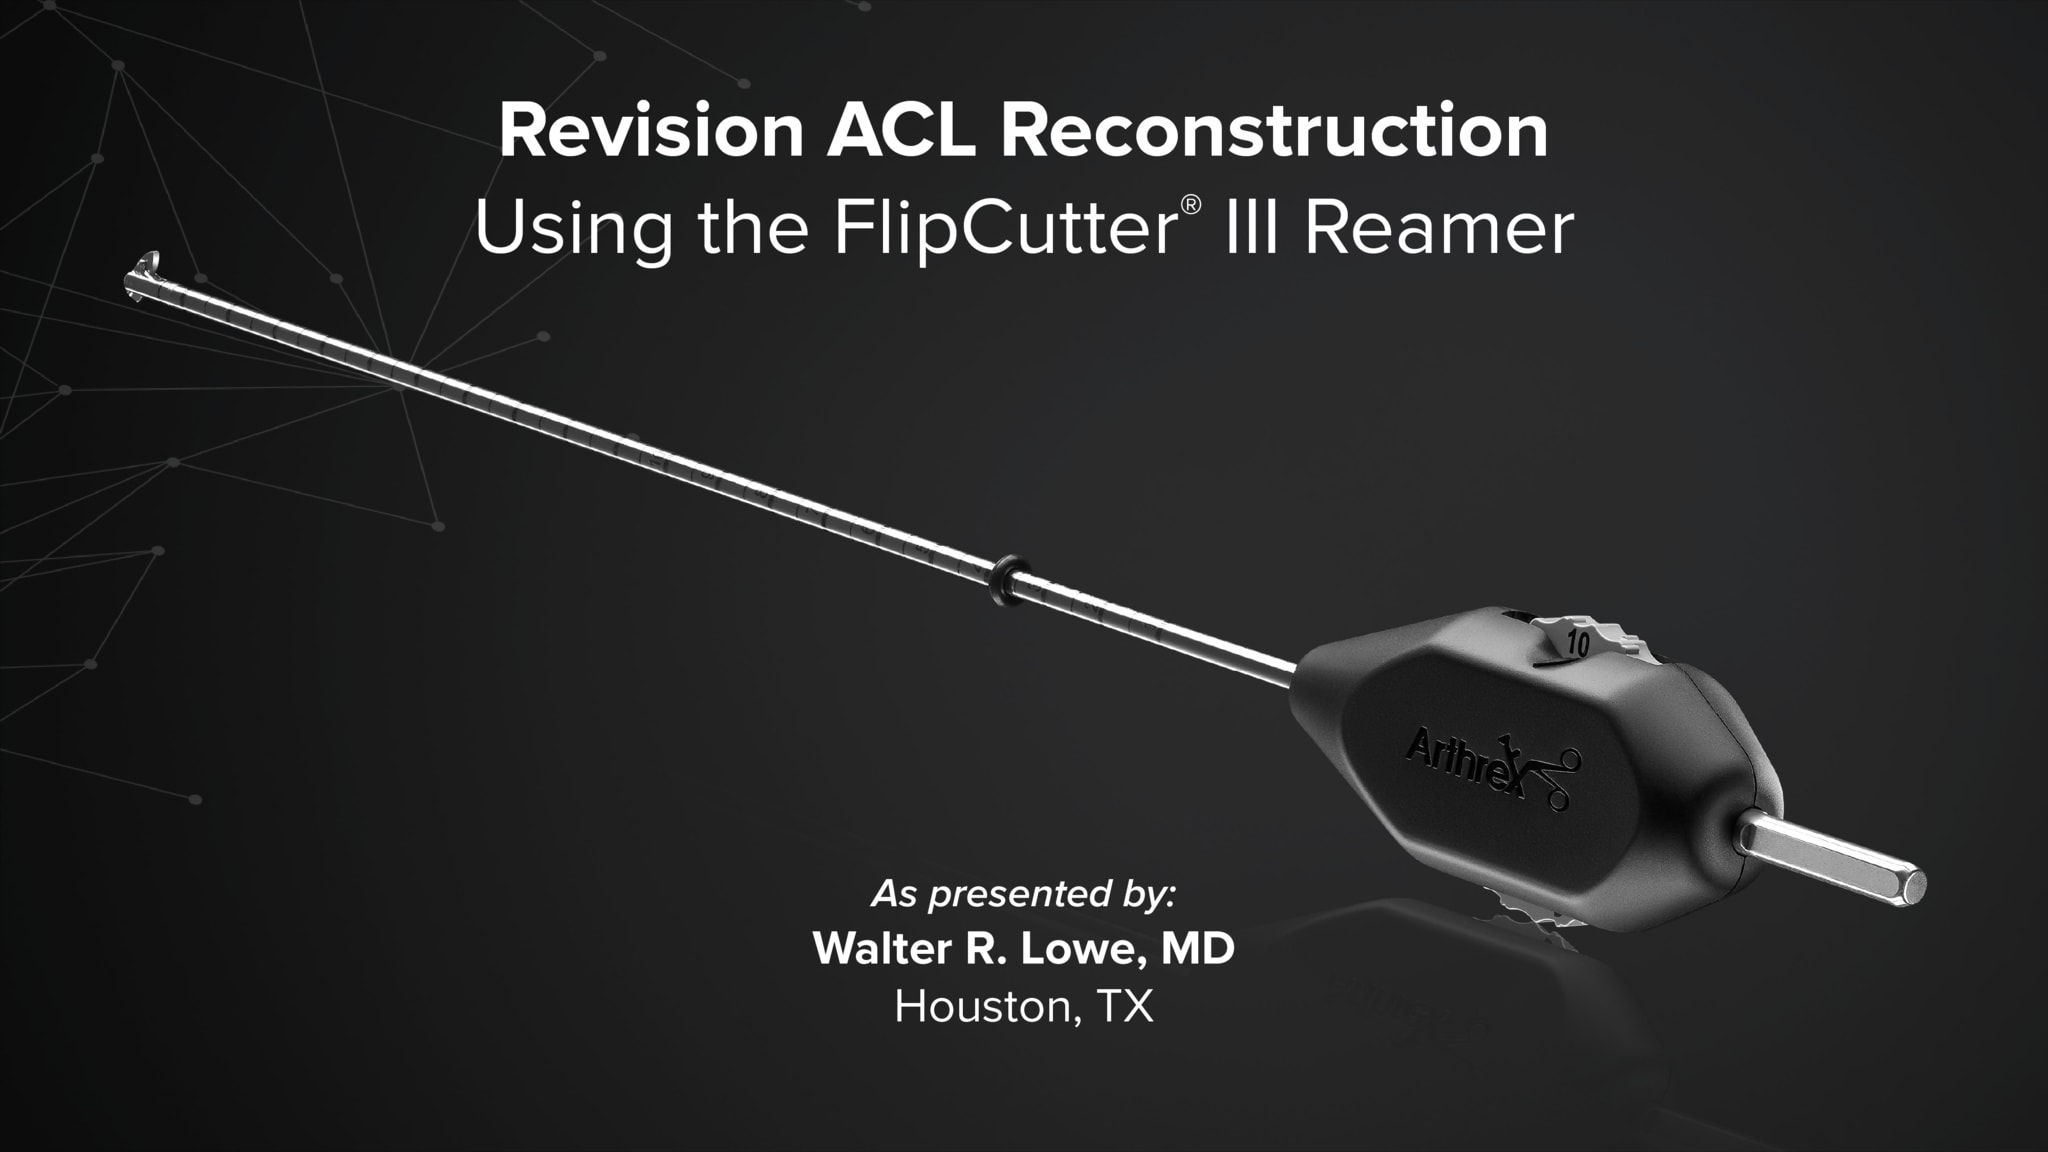 Revision ACL Reconstruction Using the FlipCutter® III Reamer